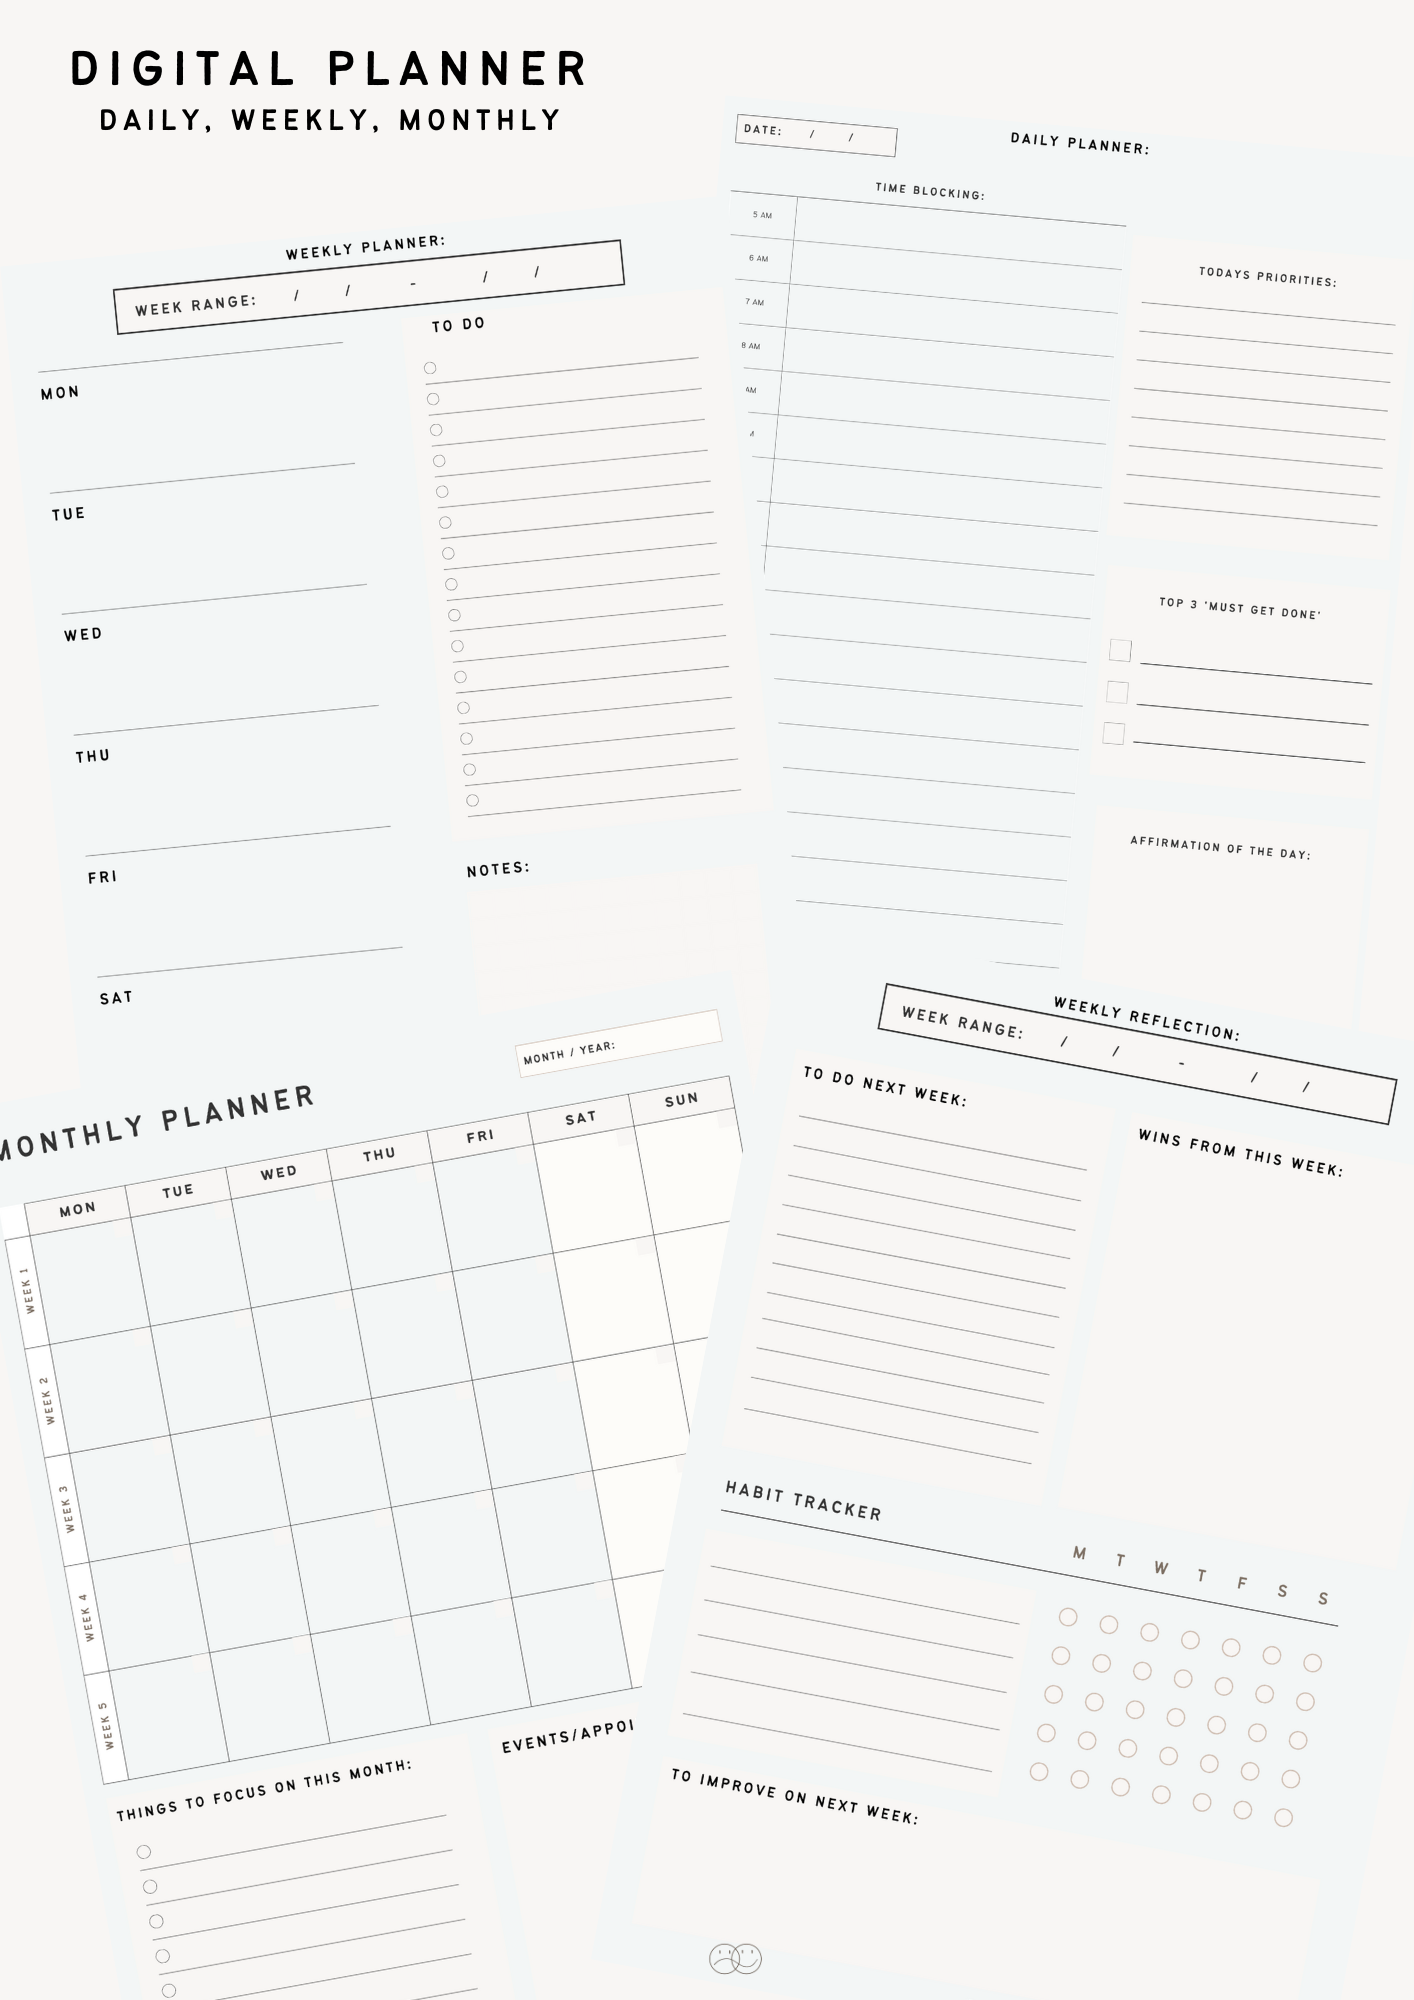 DIGITAL PLANNER (daily, weekly, monthly)